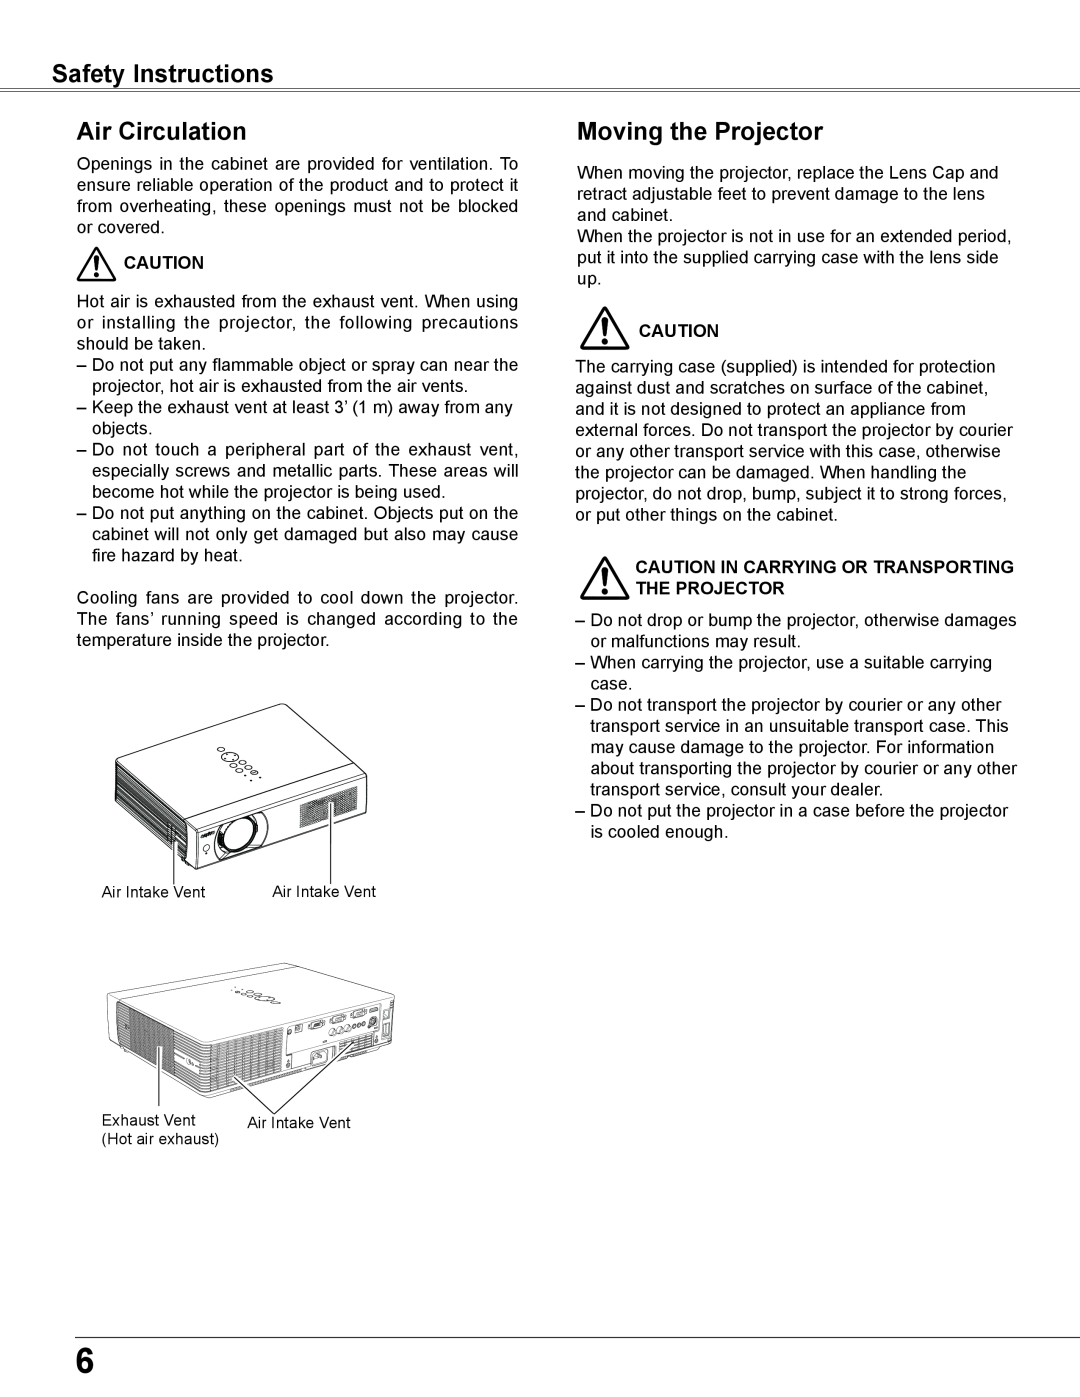 Sanyo WXU700A Safety Instructions Air Circulation, Moving the Projector, Caution In Carrying Or Transporting The Projector 